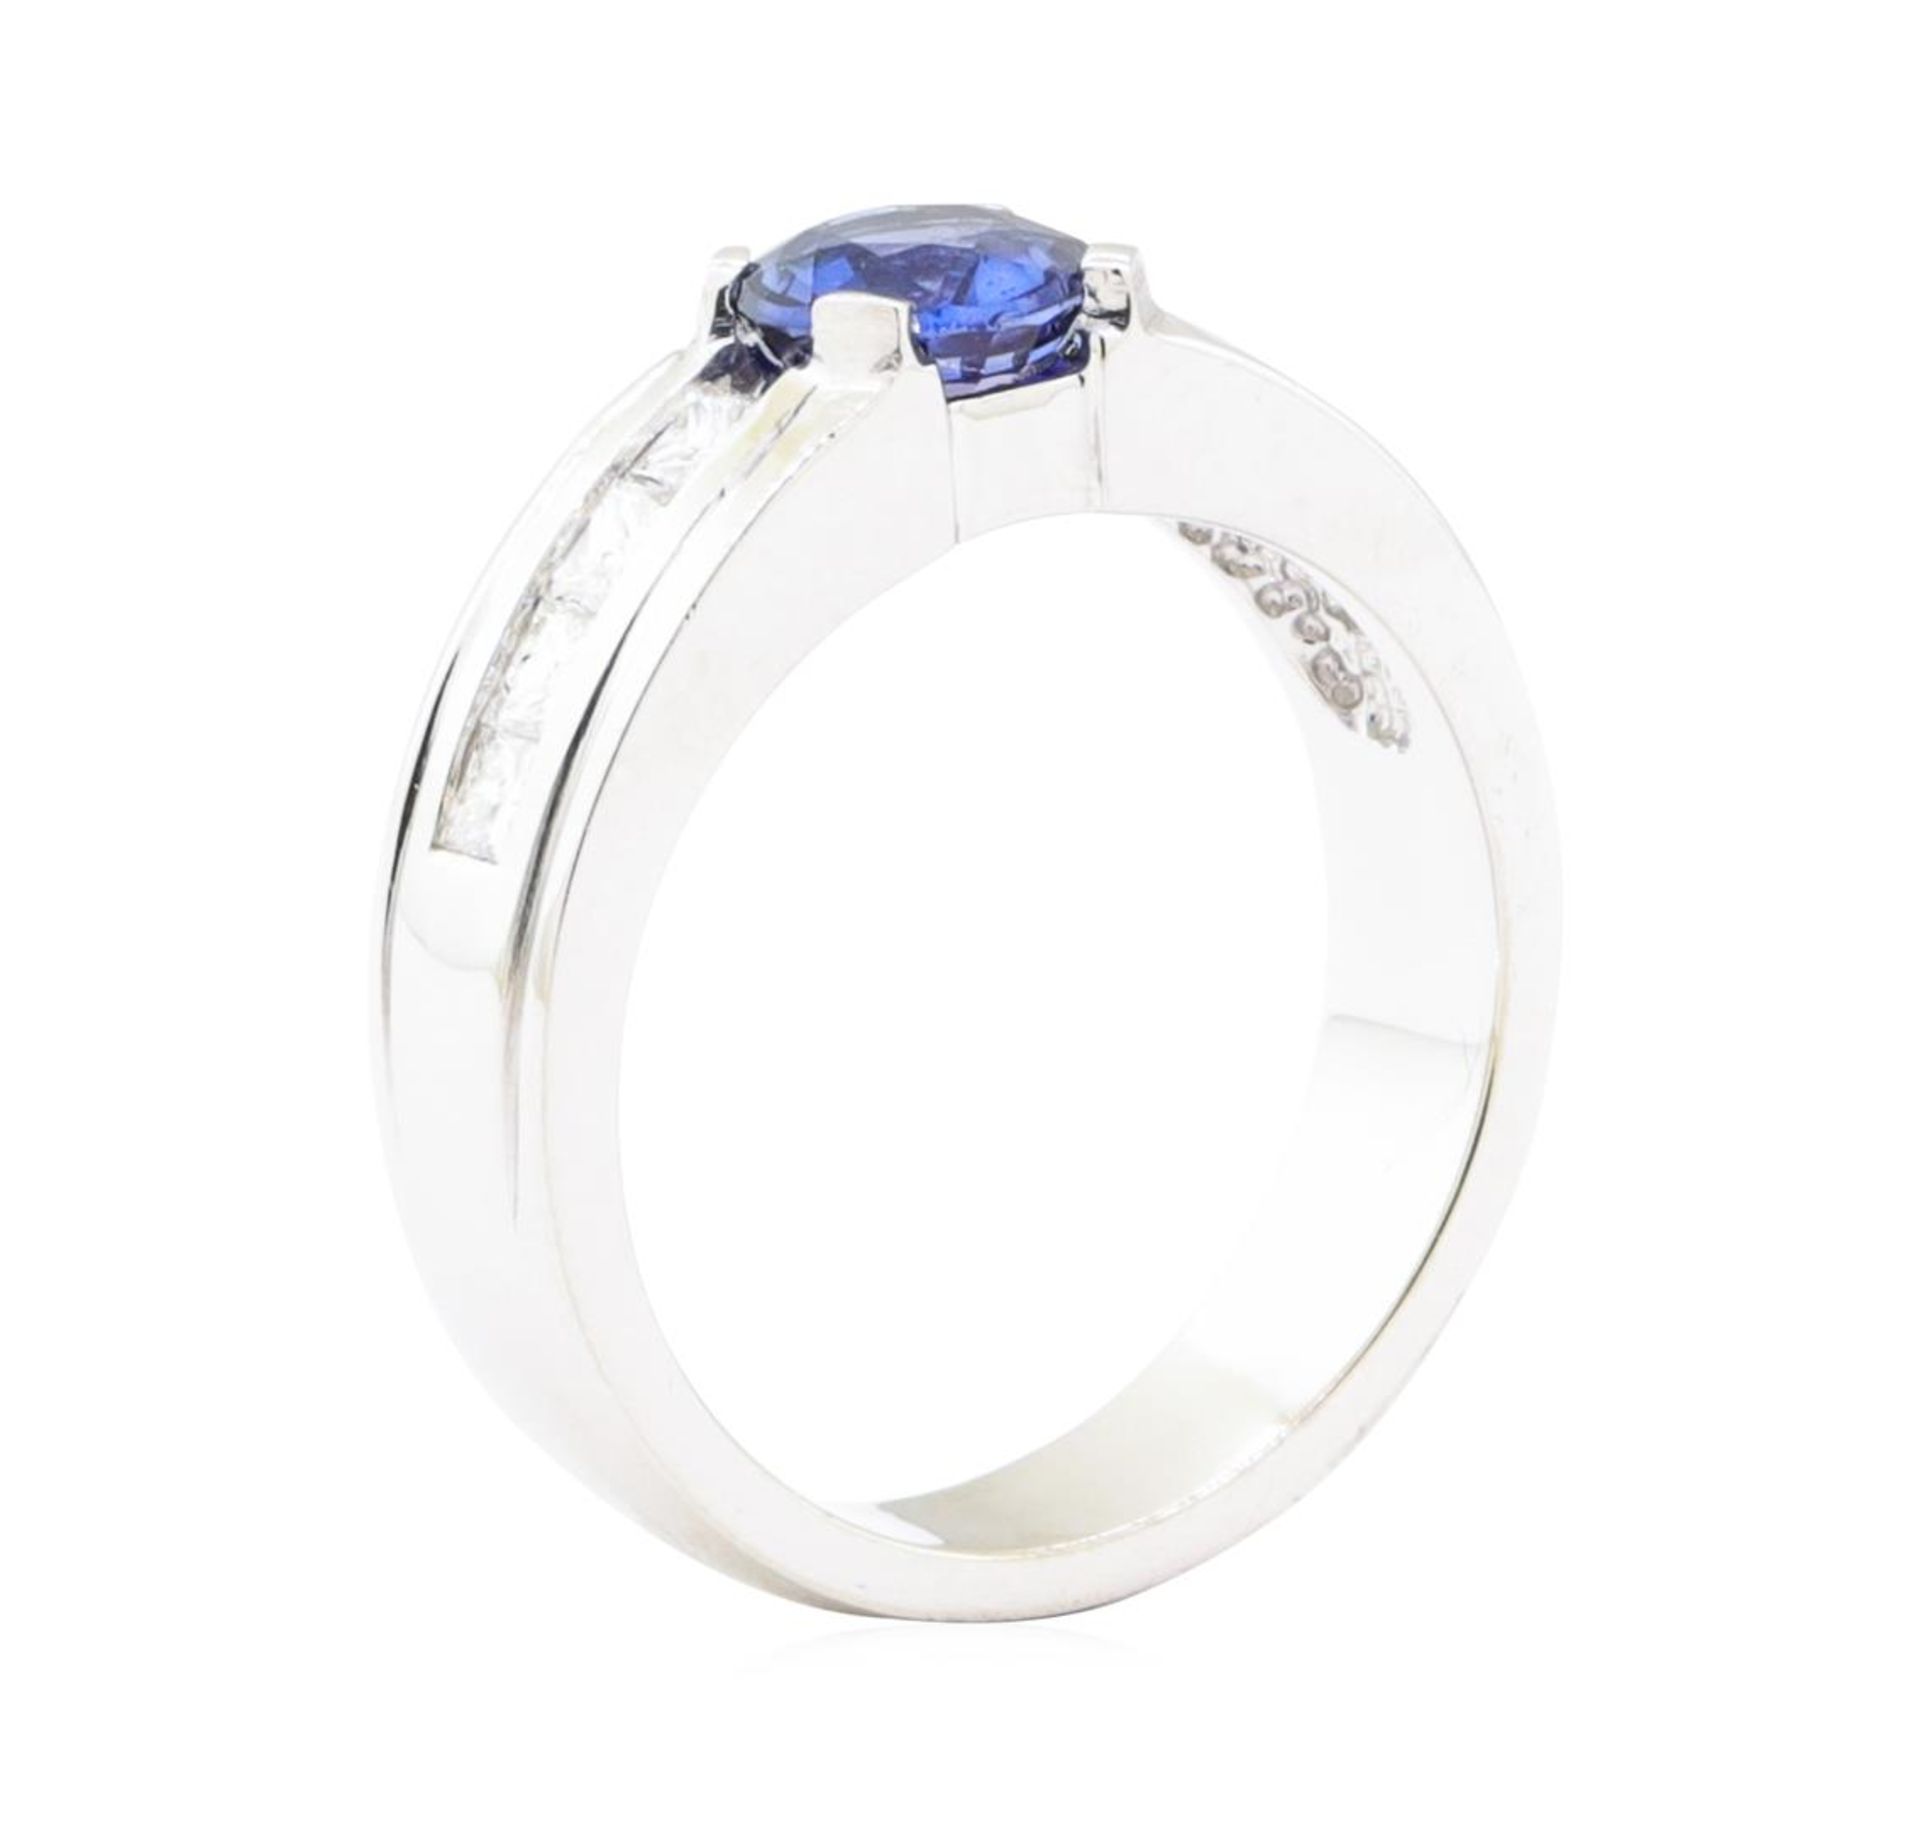 1.79ctw Sapphire and Diamond Ring - 14KT White Gold - Image 4 of 4